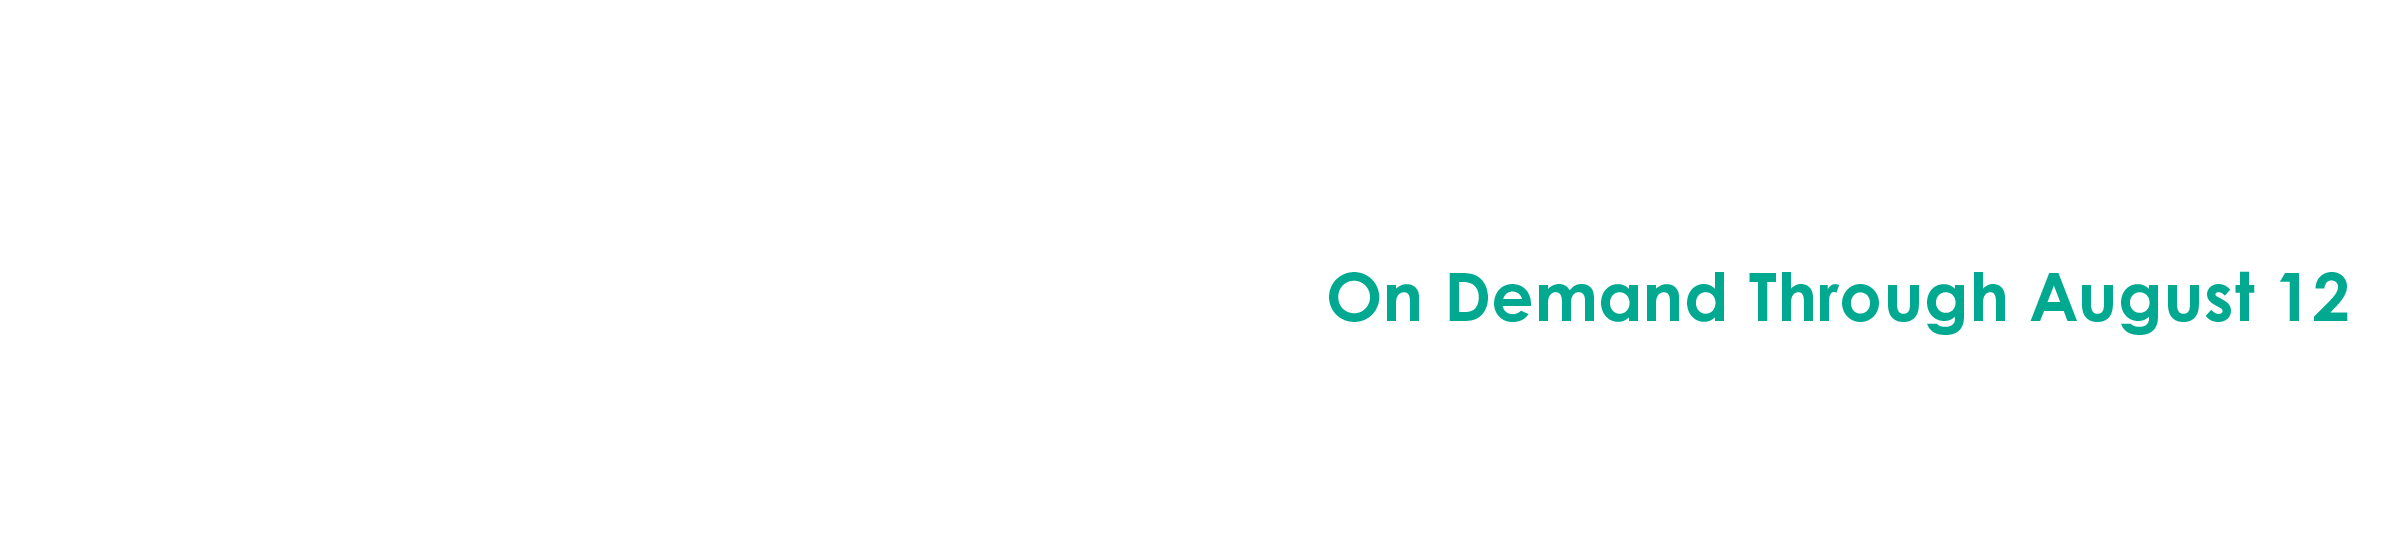 2022 Board Review Course